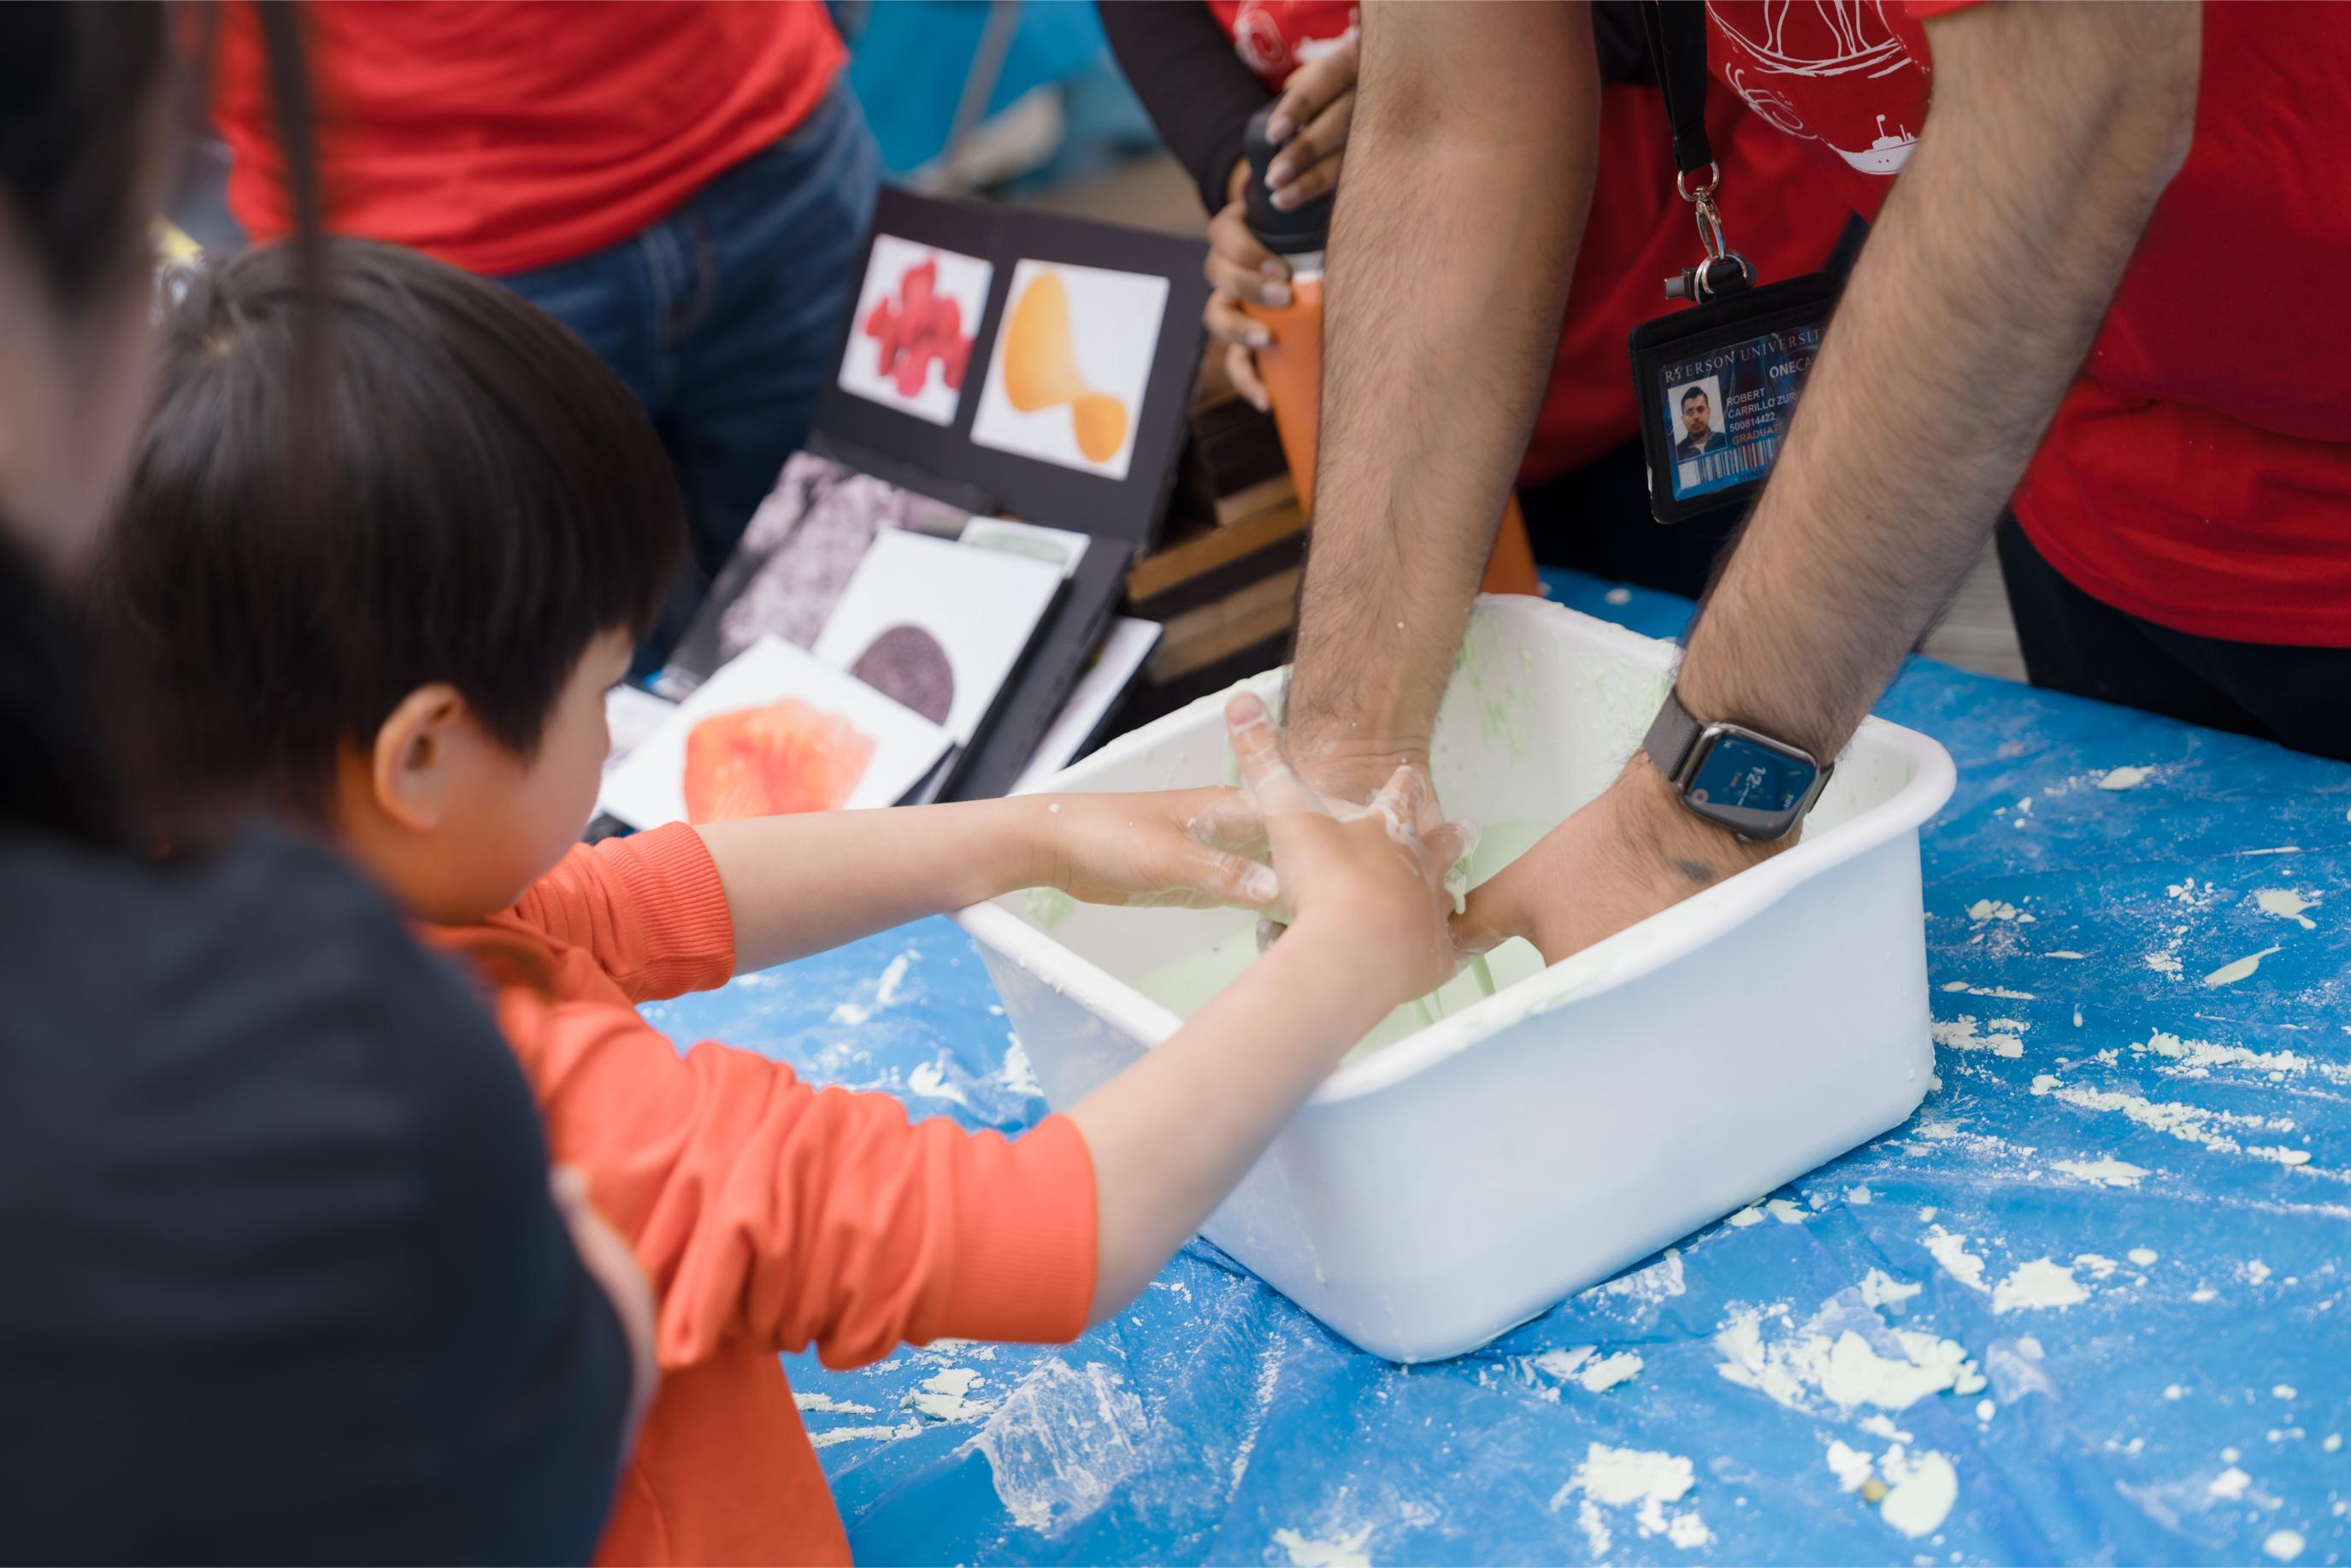 A child making green slime with a volunteer in a white container at the Food Science Now booth.